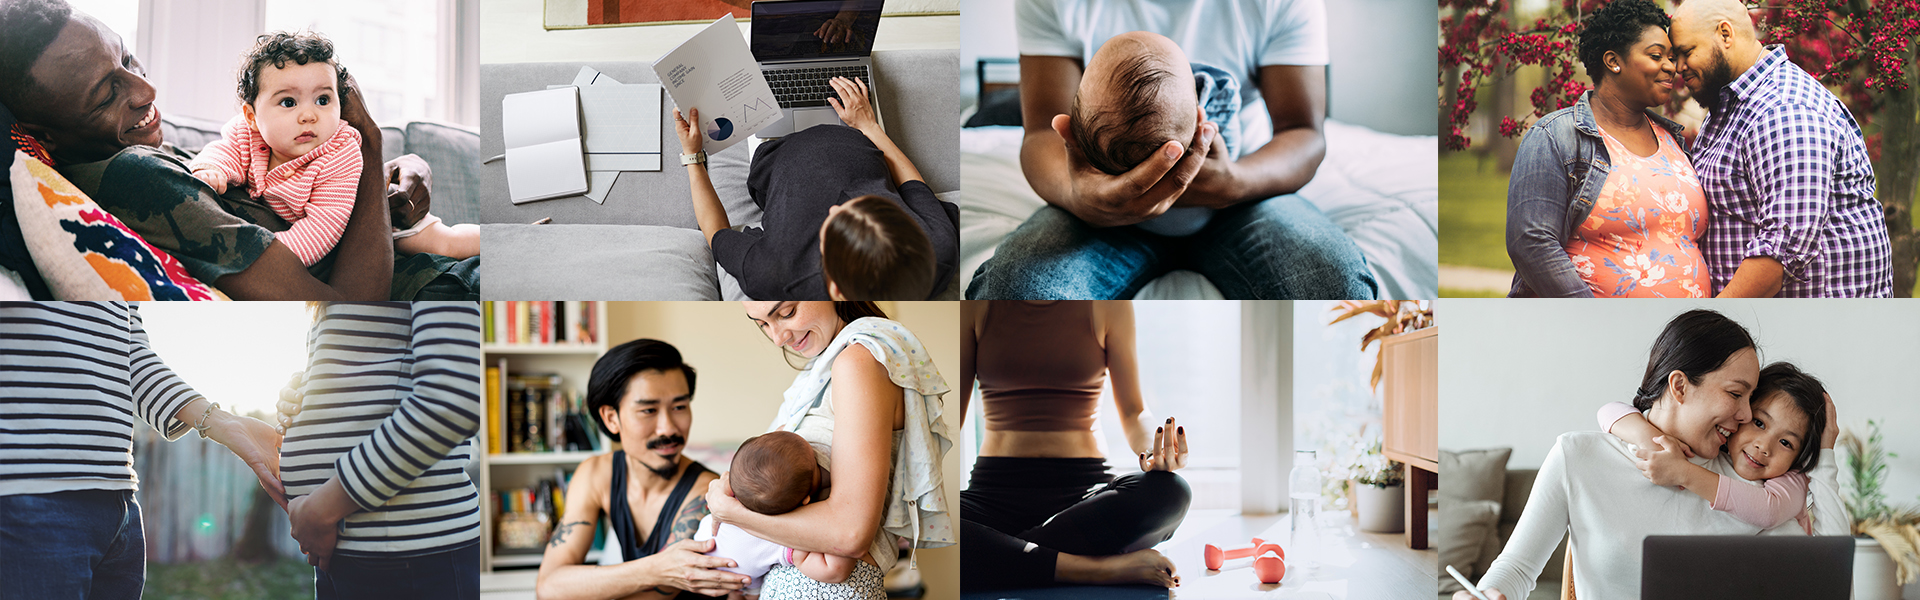 grid of images of parents and children